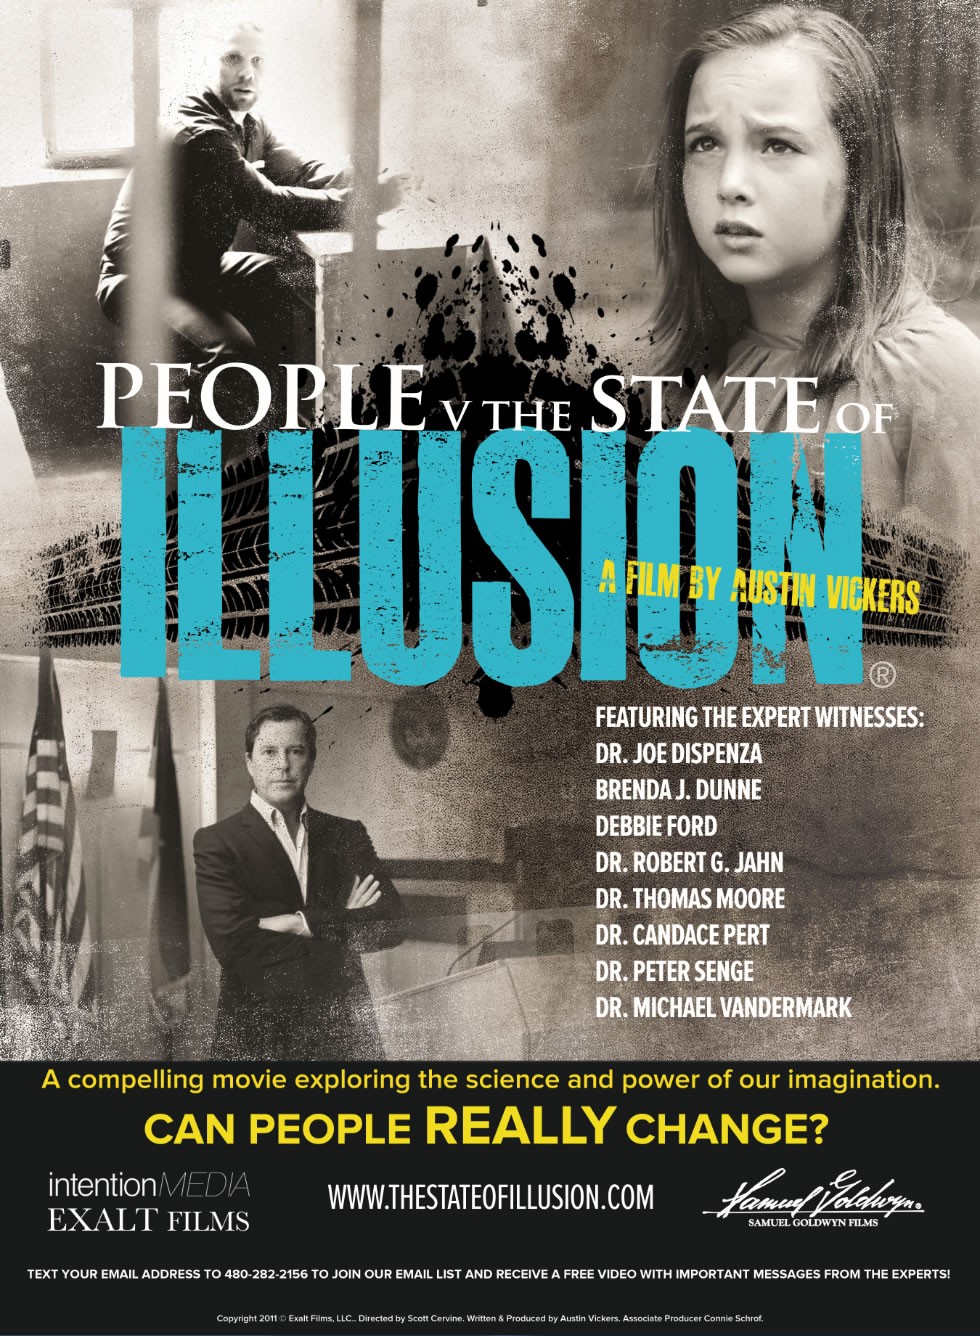 Extra Large Movie Poster Image for People v. The State of Illusion 